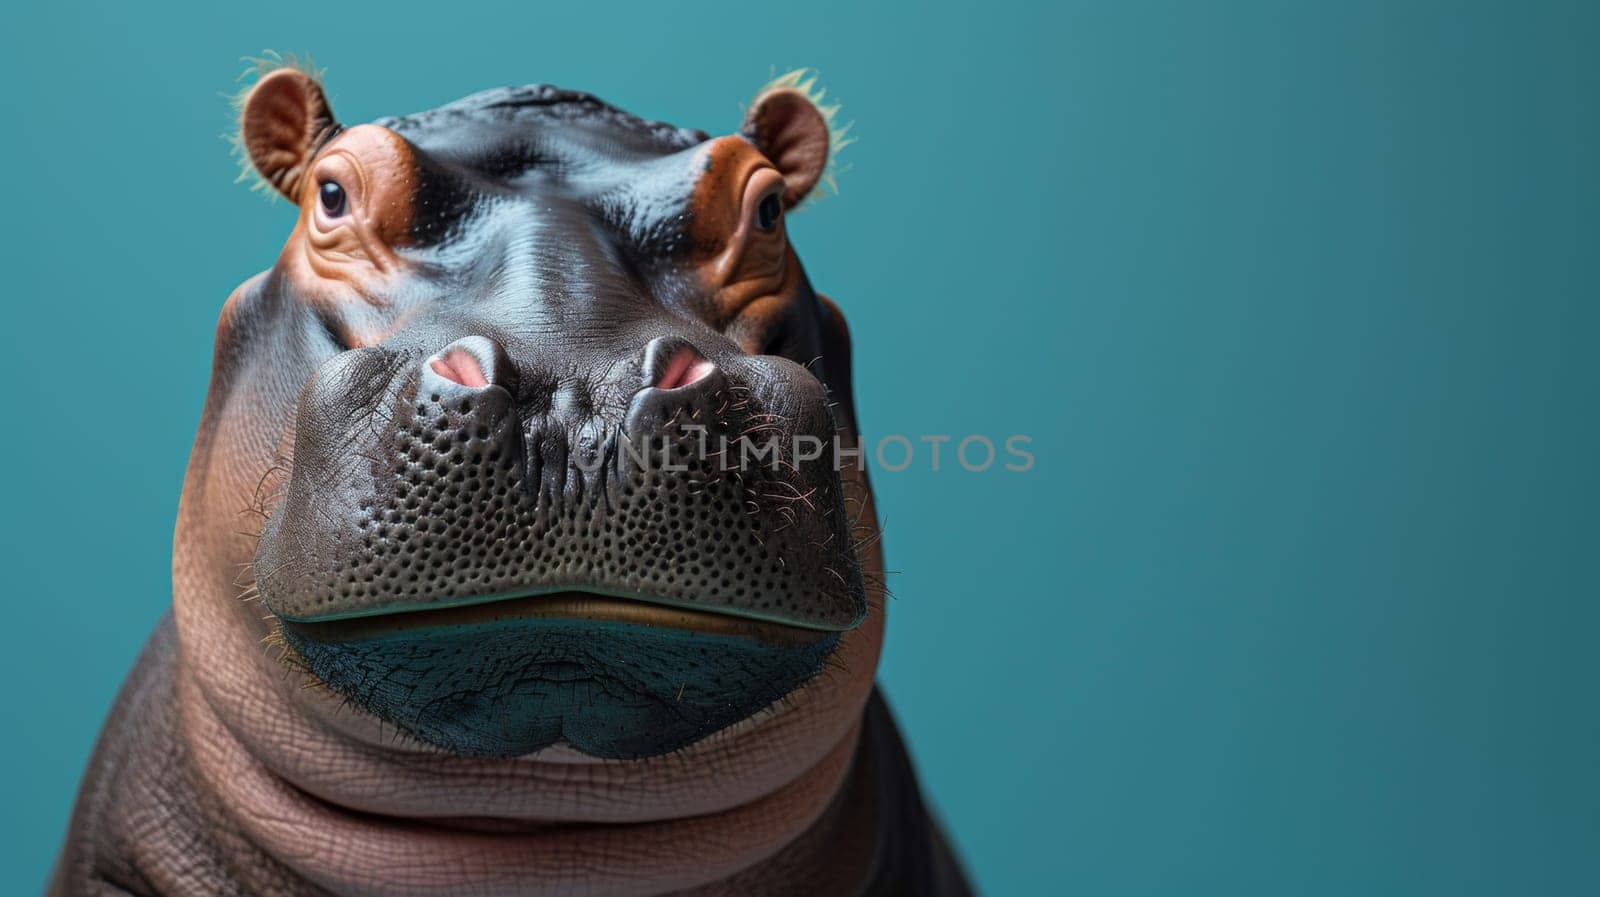 A close up of a hippo's face with the blue background